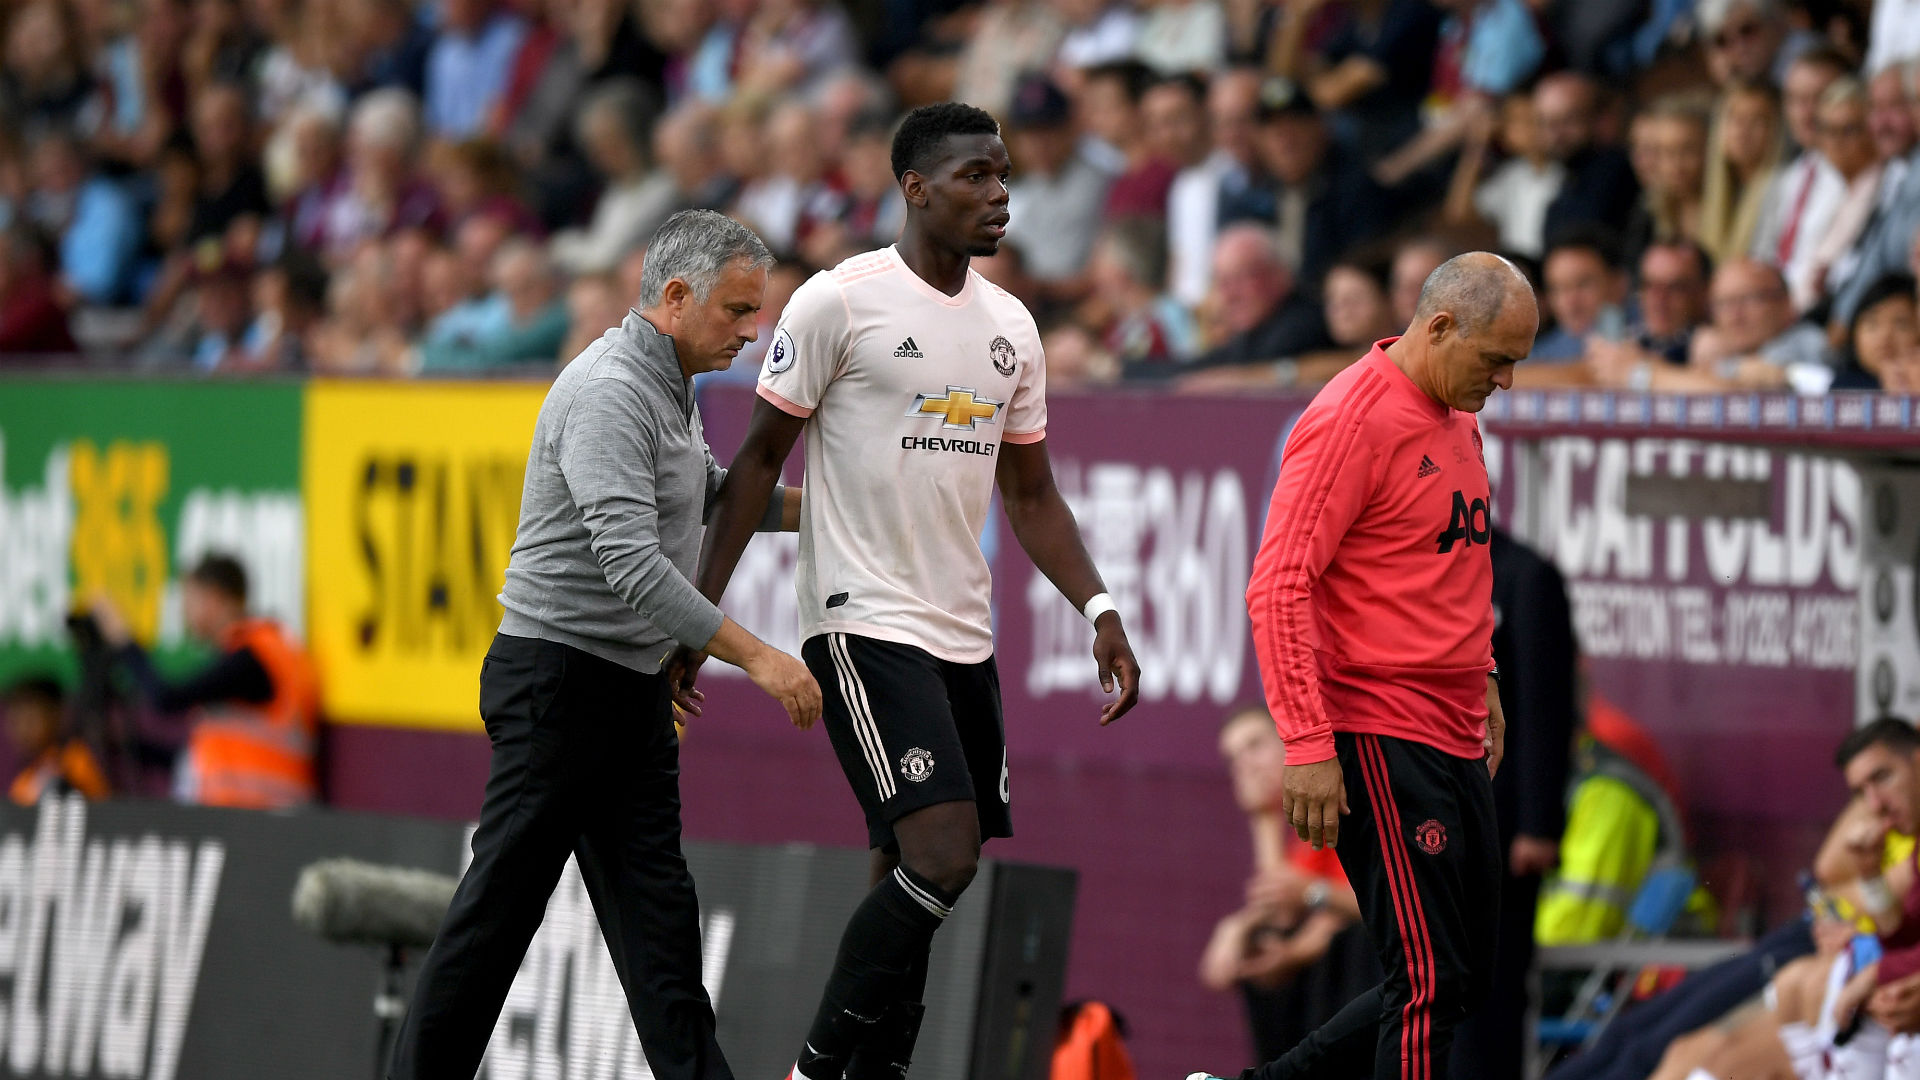 Manchester United sacked Jose Mourinho due to results, according to Paul Pogba, who had a difficult relationship with his former manager.